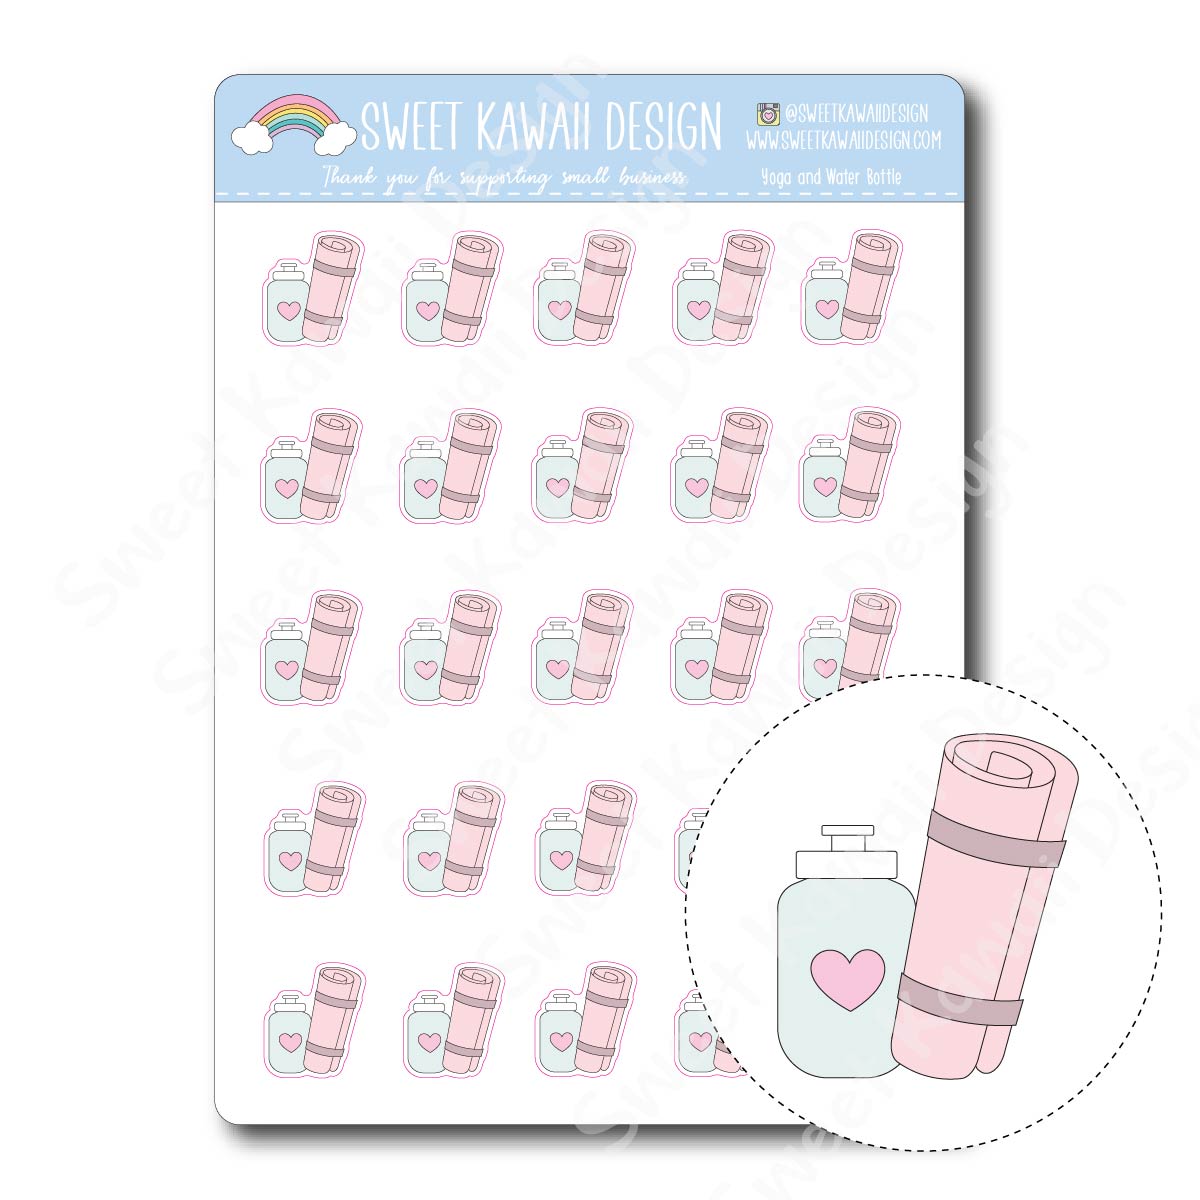 Kawaii Yoga and Water Bottle Stickers